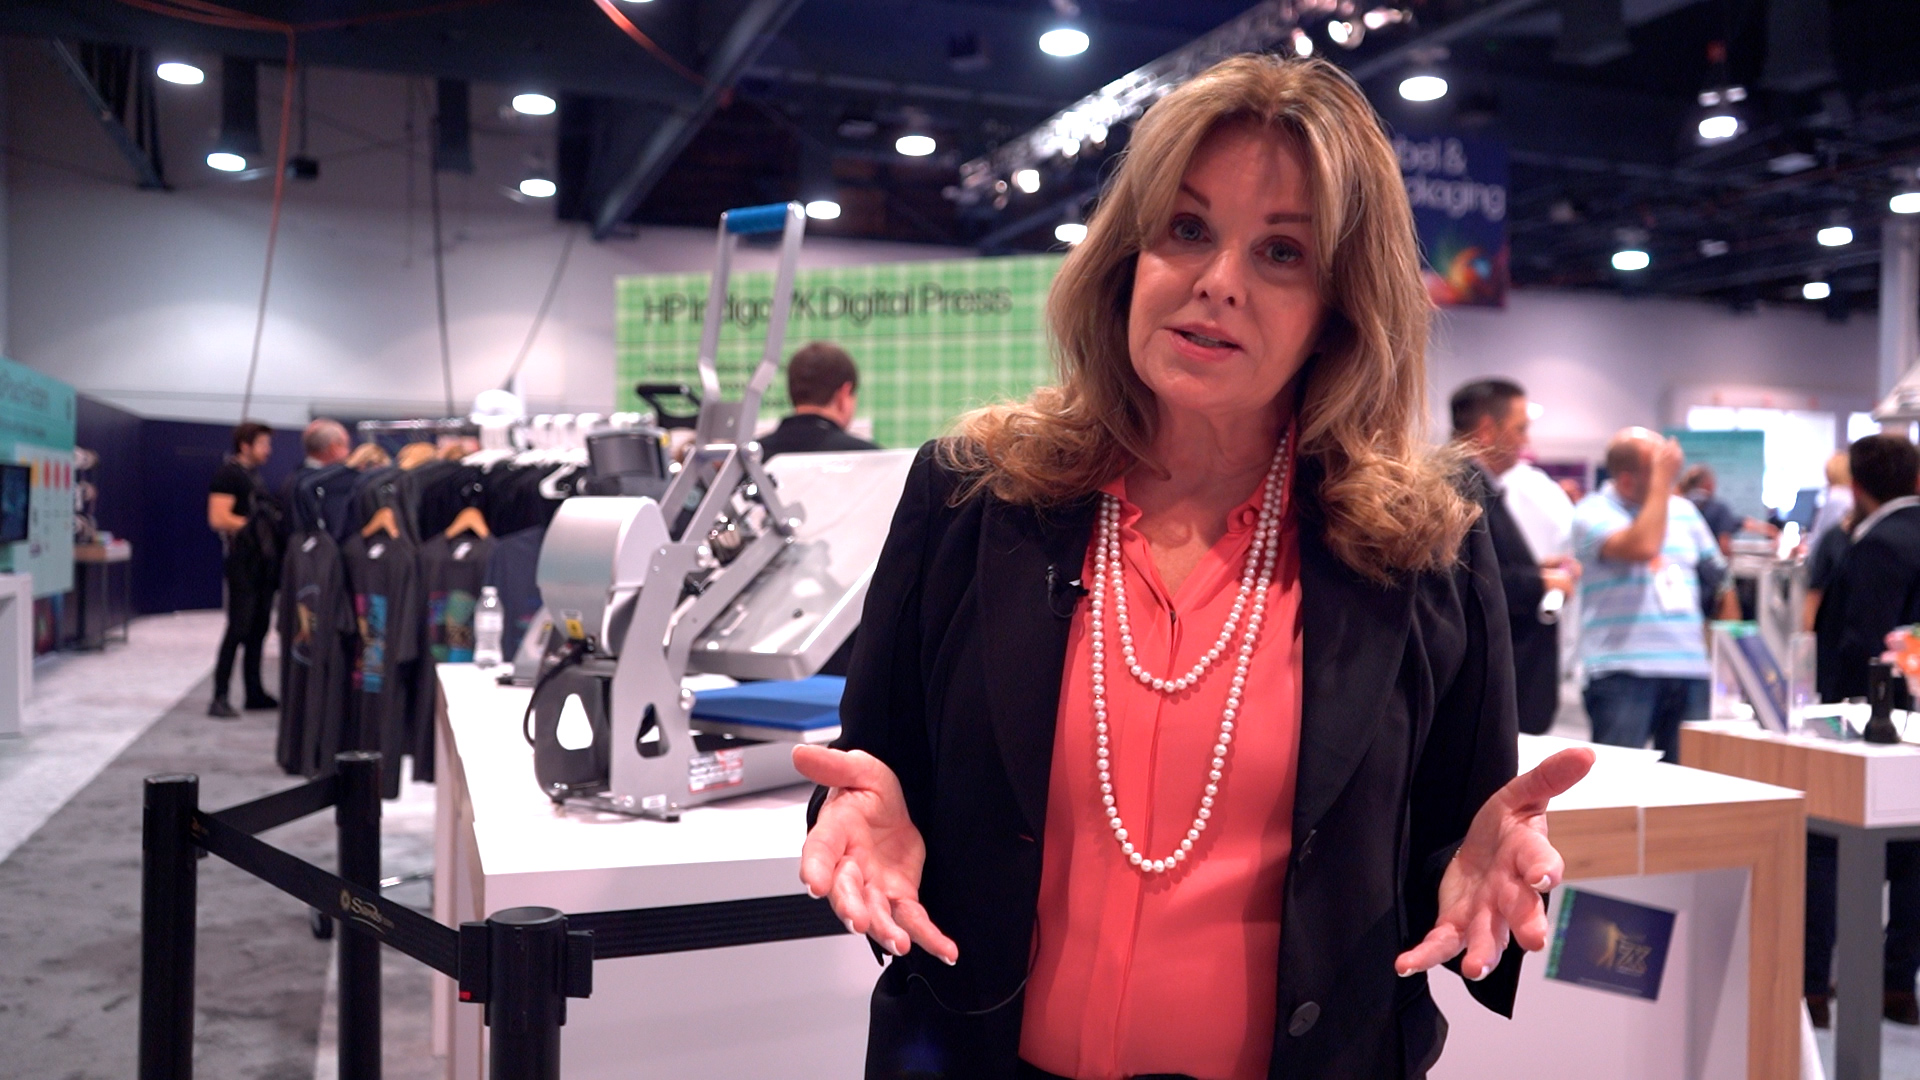 GroupeSTAHL North America’s Carleen Grey on Digital Transfer Materials for Textile Printing